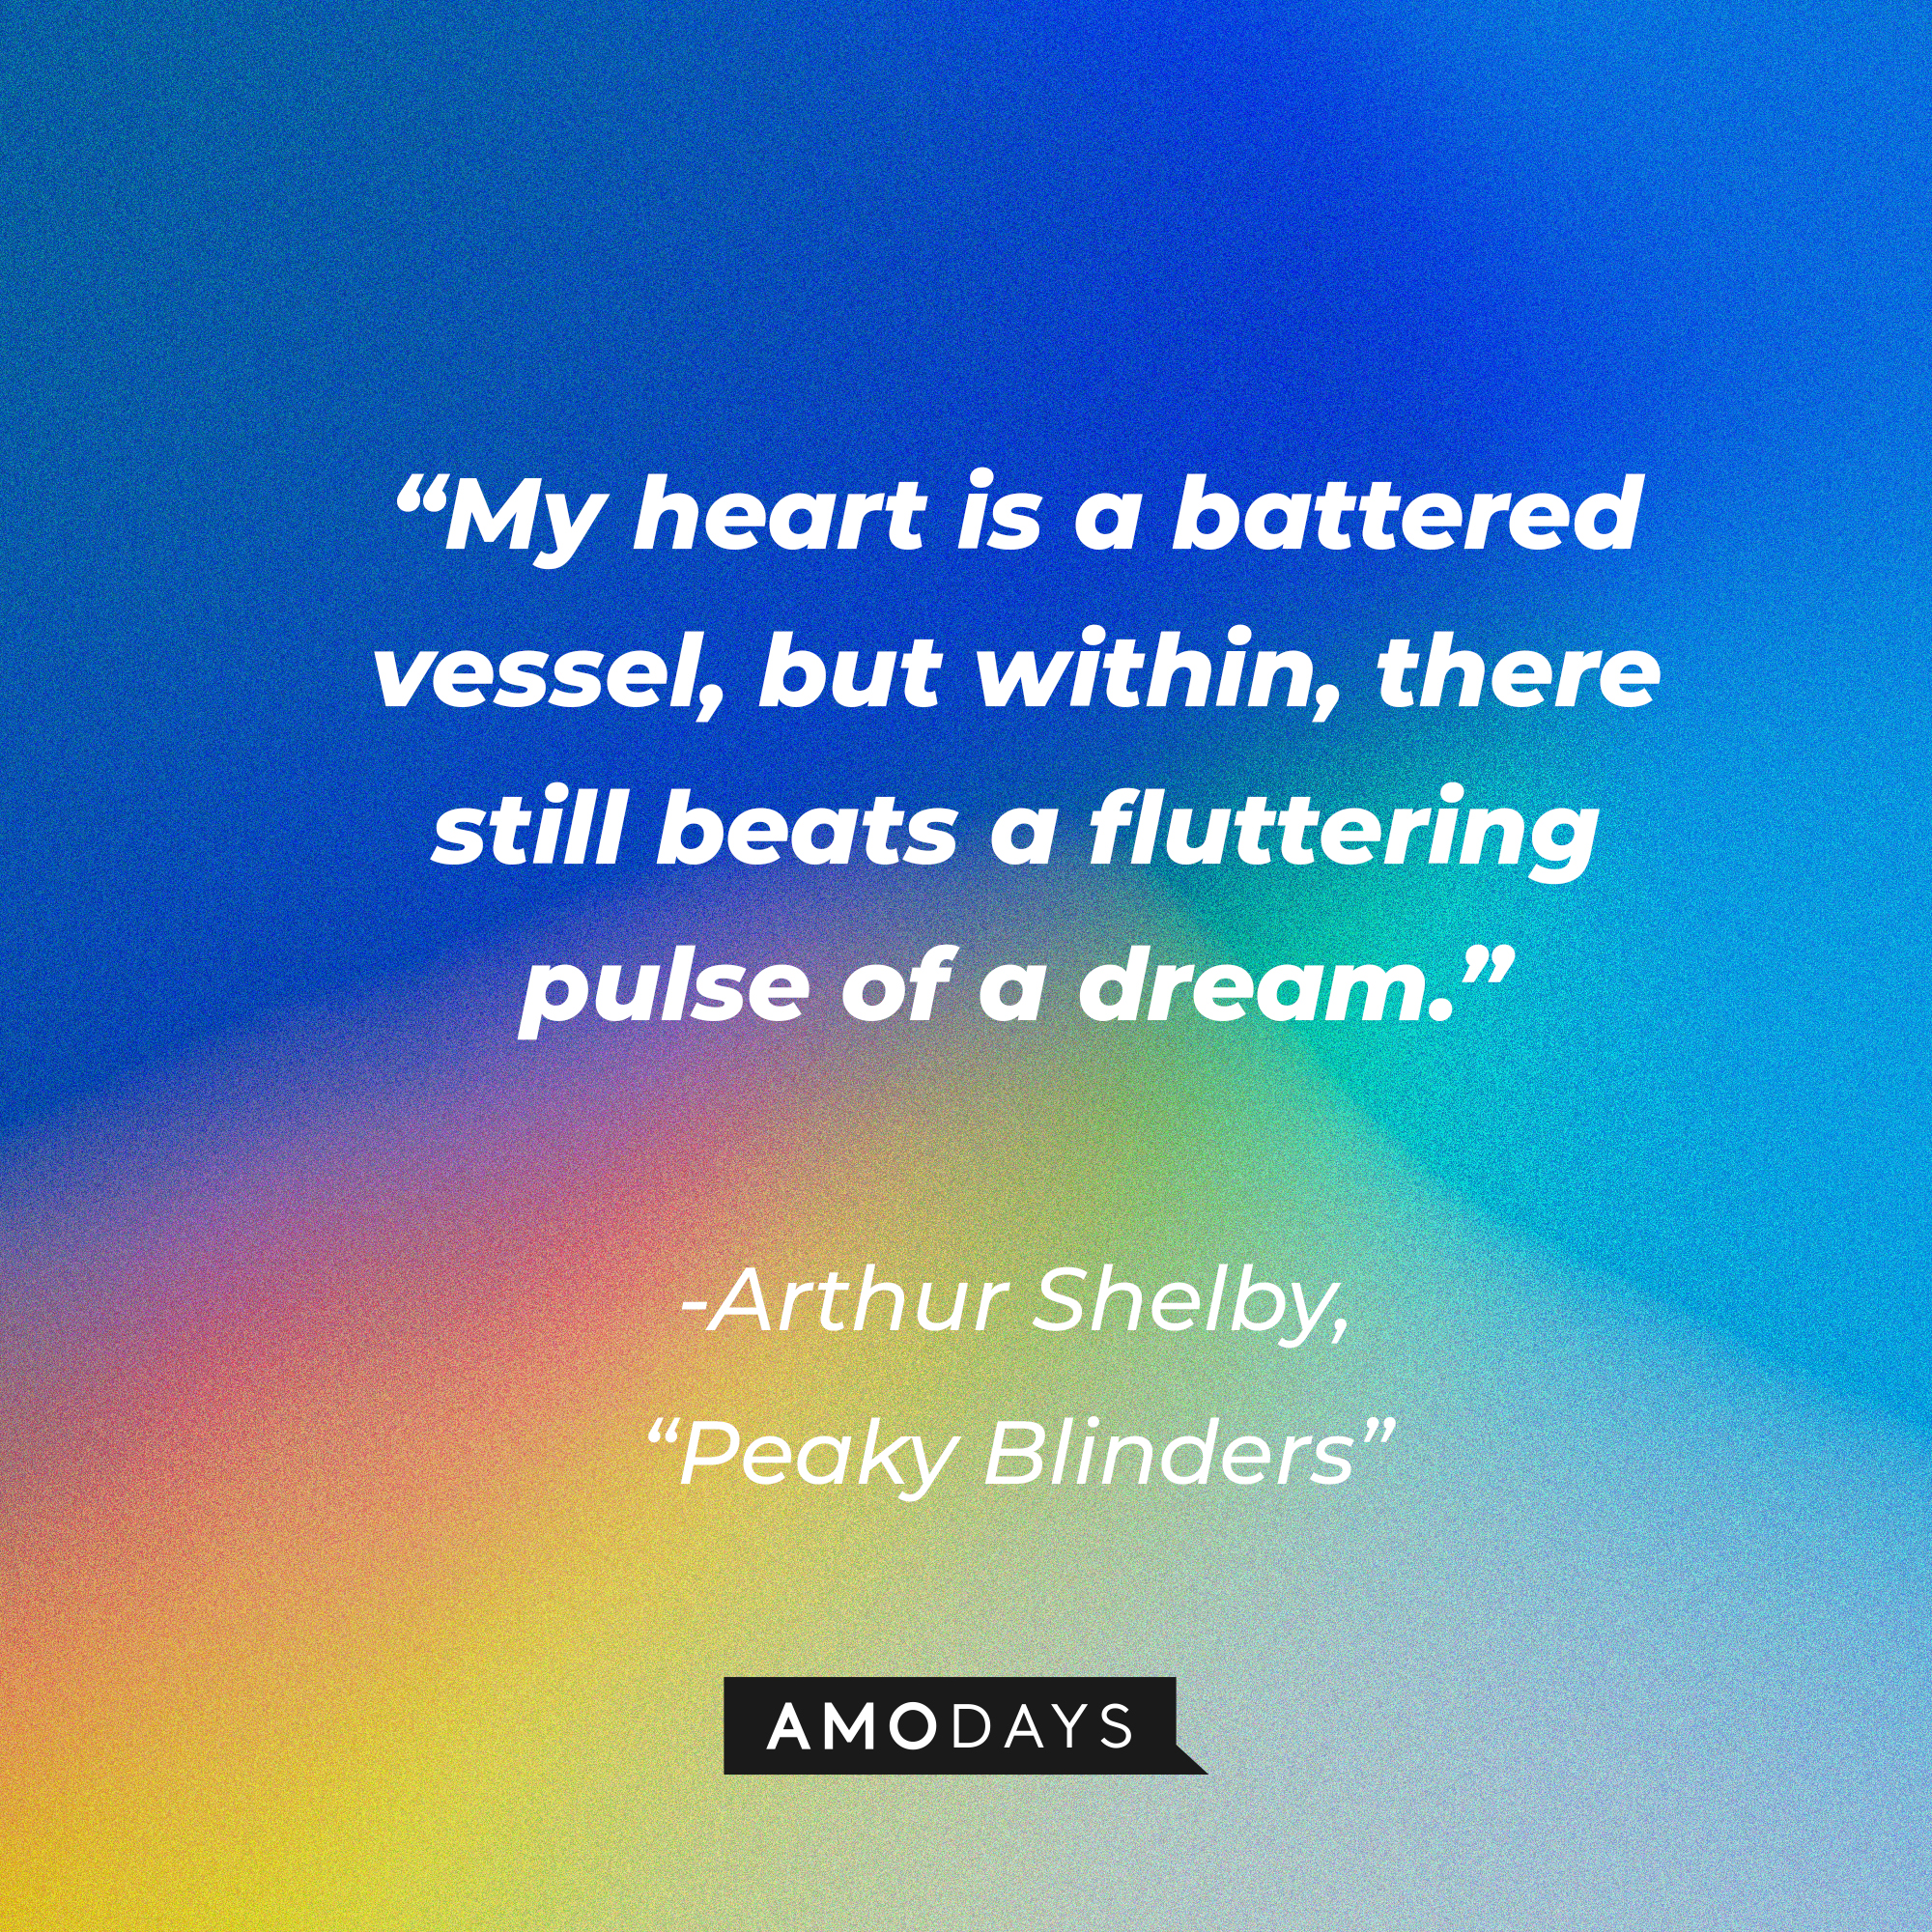 Arthur Shelby's his quote in "Peaky Blinders:" "My heart is a battered vessel, but within, there still beats a fluttering pulse of a dream." | Source: Facebook.com/PeakyBlinders